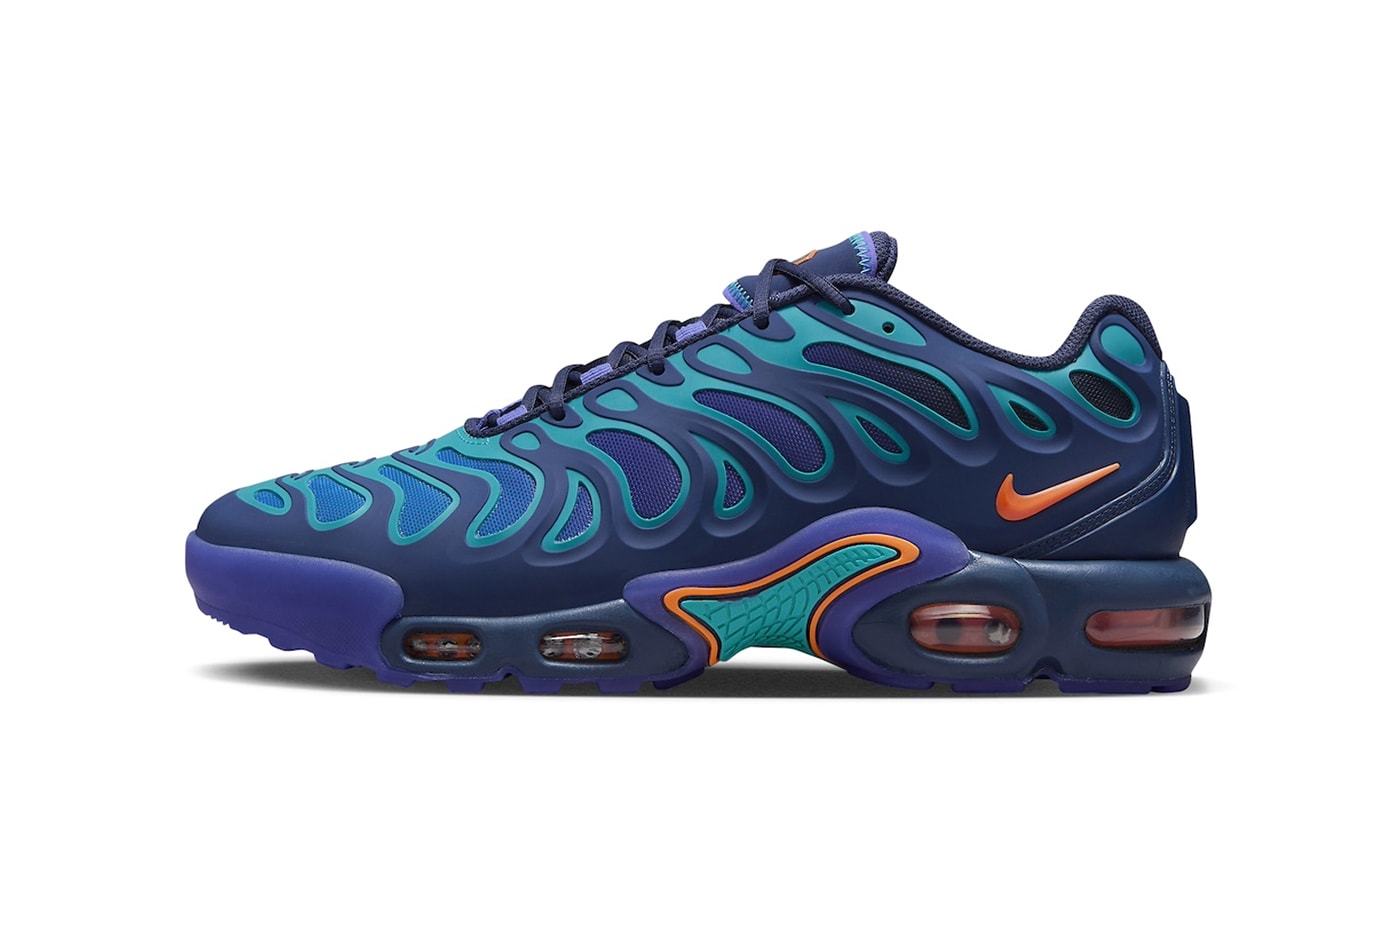 Nike Air Max Plus Drift Surfaces in "Midnight Navy" FD4290-400 release info total orange air max day sneaker comfort swoosh colorful eclectic